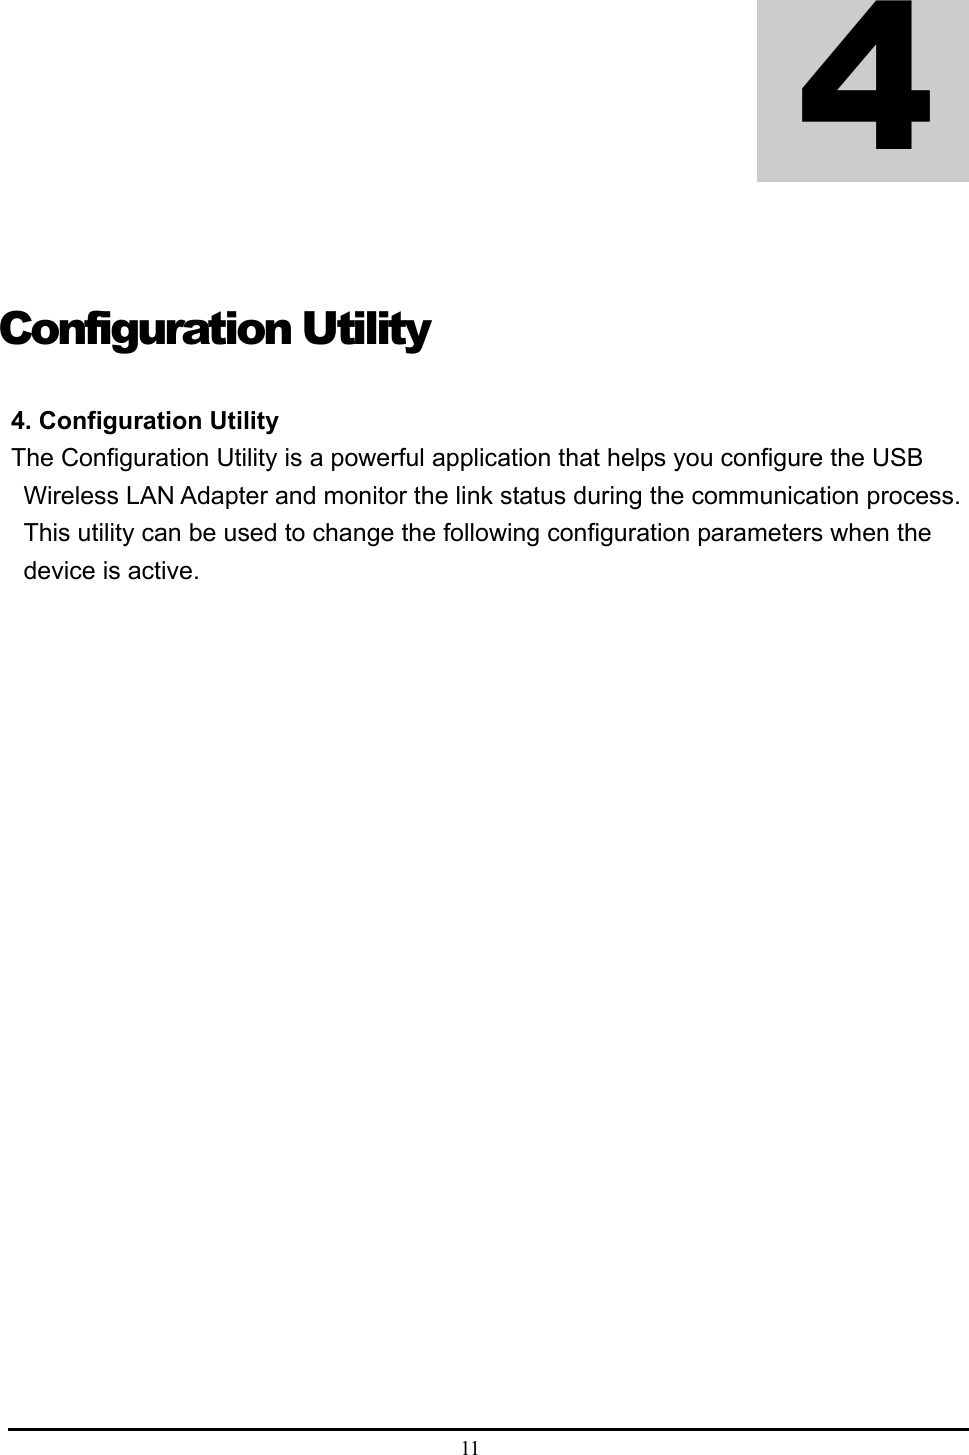  11   Configuration Utility  4. Configuration Utility   The Configuration Utility is a powerful application that helps you configure the USB Wireless LAN Adapter and monitor the link status during the communication process. This utility can be used to change the following configuration parameters when the device is active.    4 